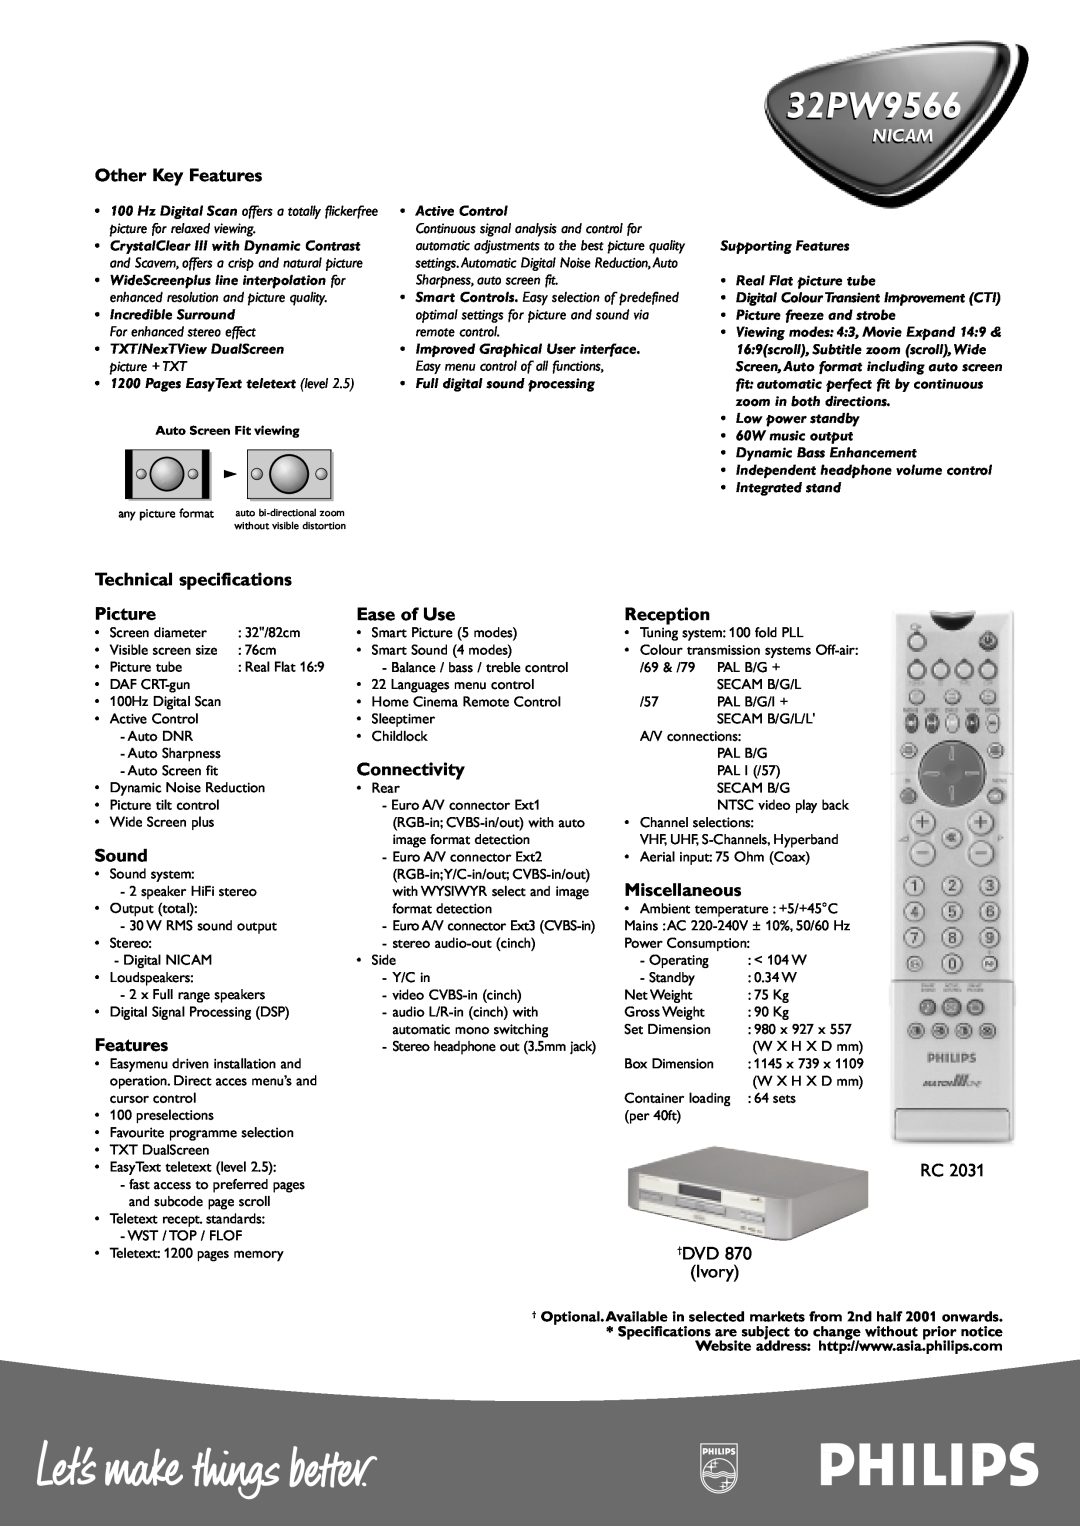 Philips 32PW9566 Nicam, Other Key Features, Technical specifications, Picture, Ease of Use, Reception, Connectivity, Sound 